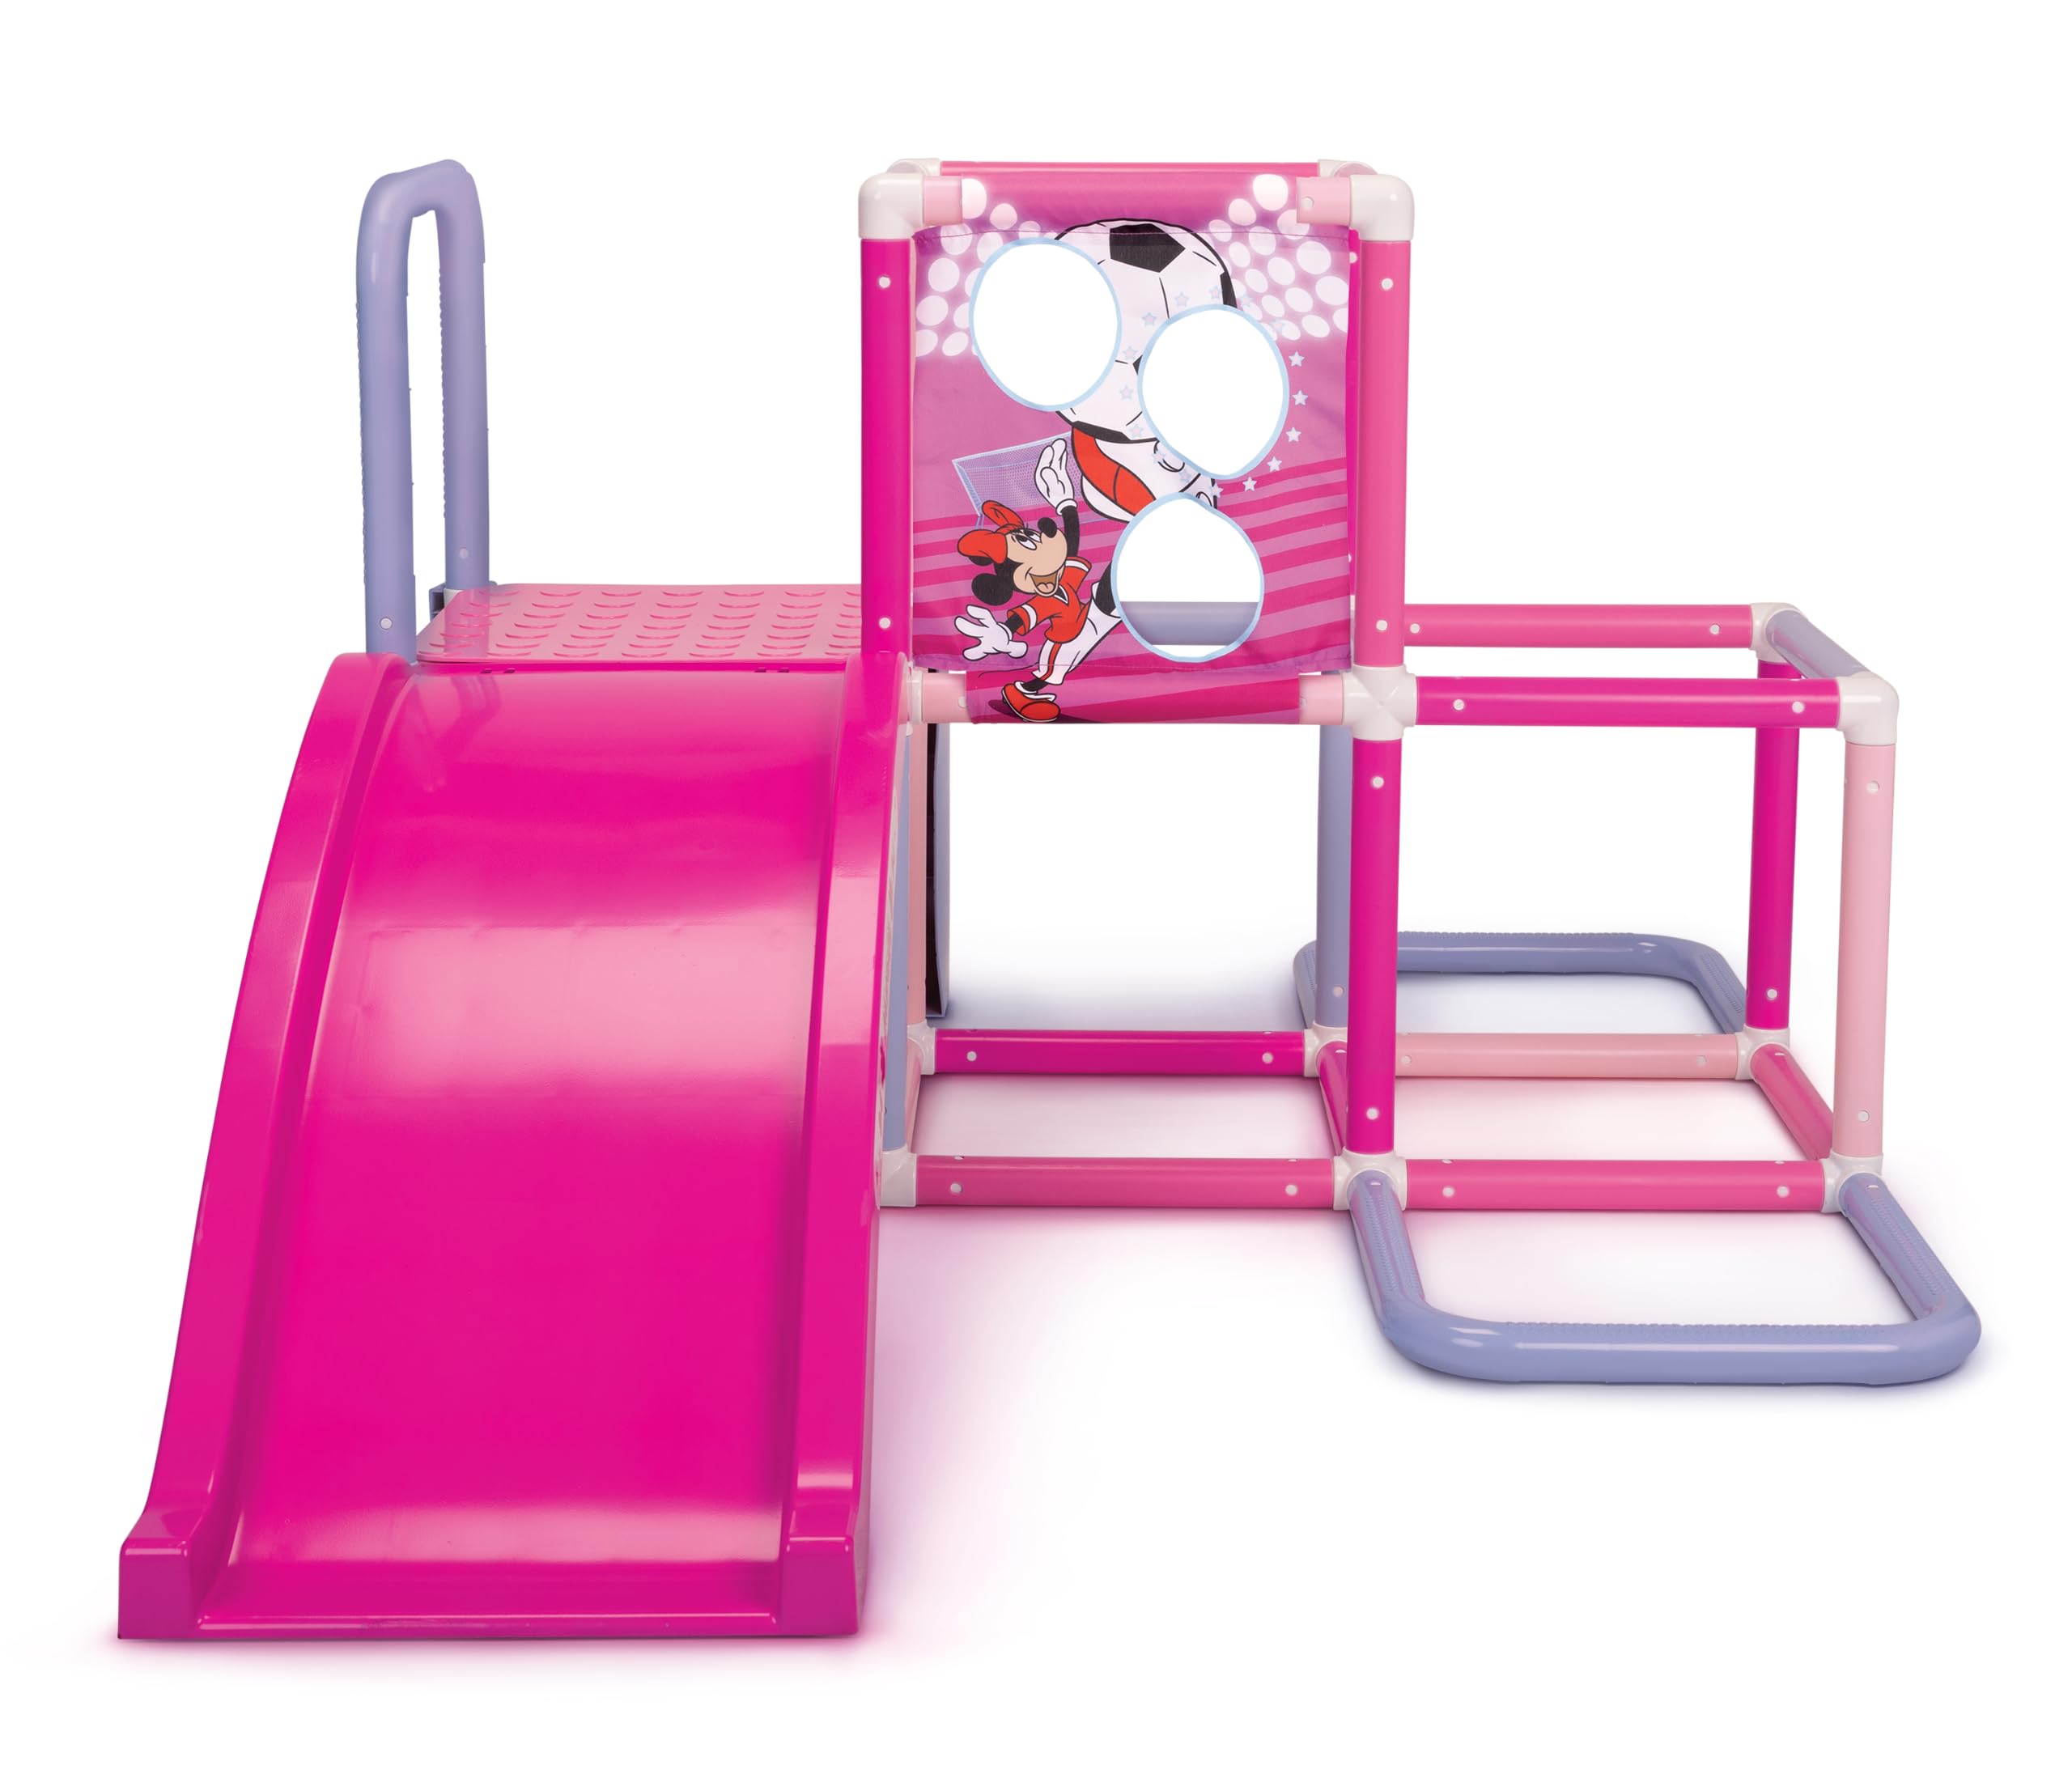 Minnie Jungle Gym play structure with Minnie bean bags